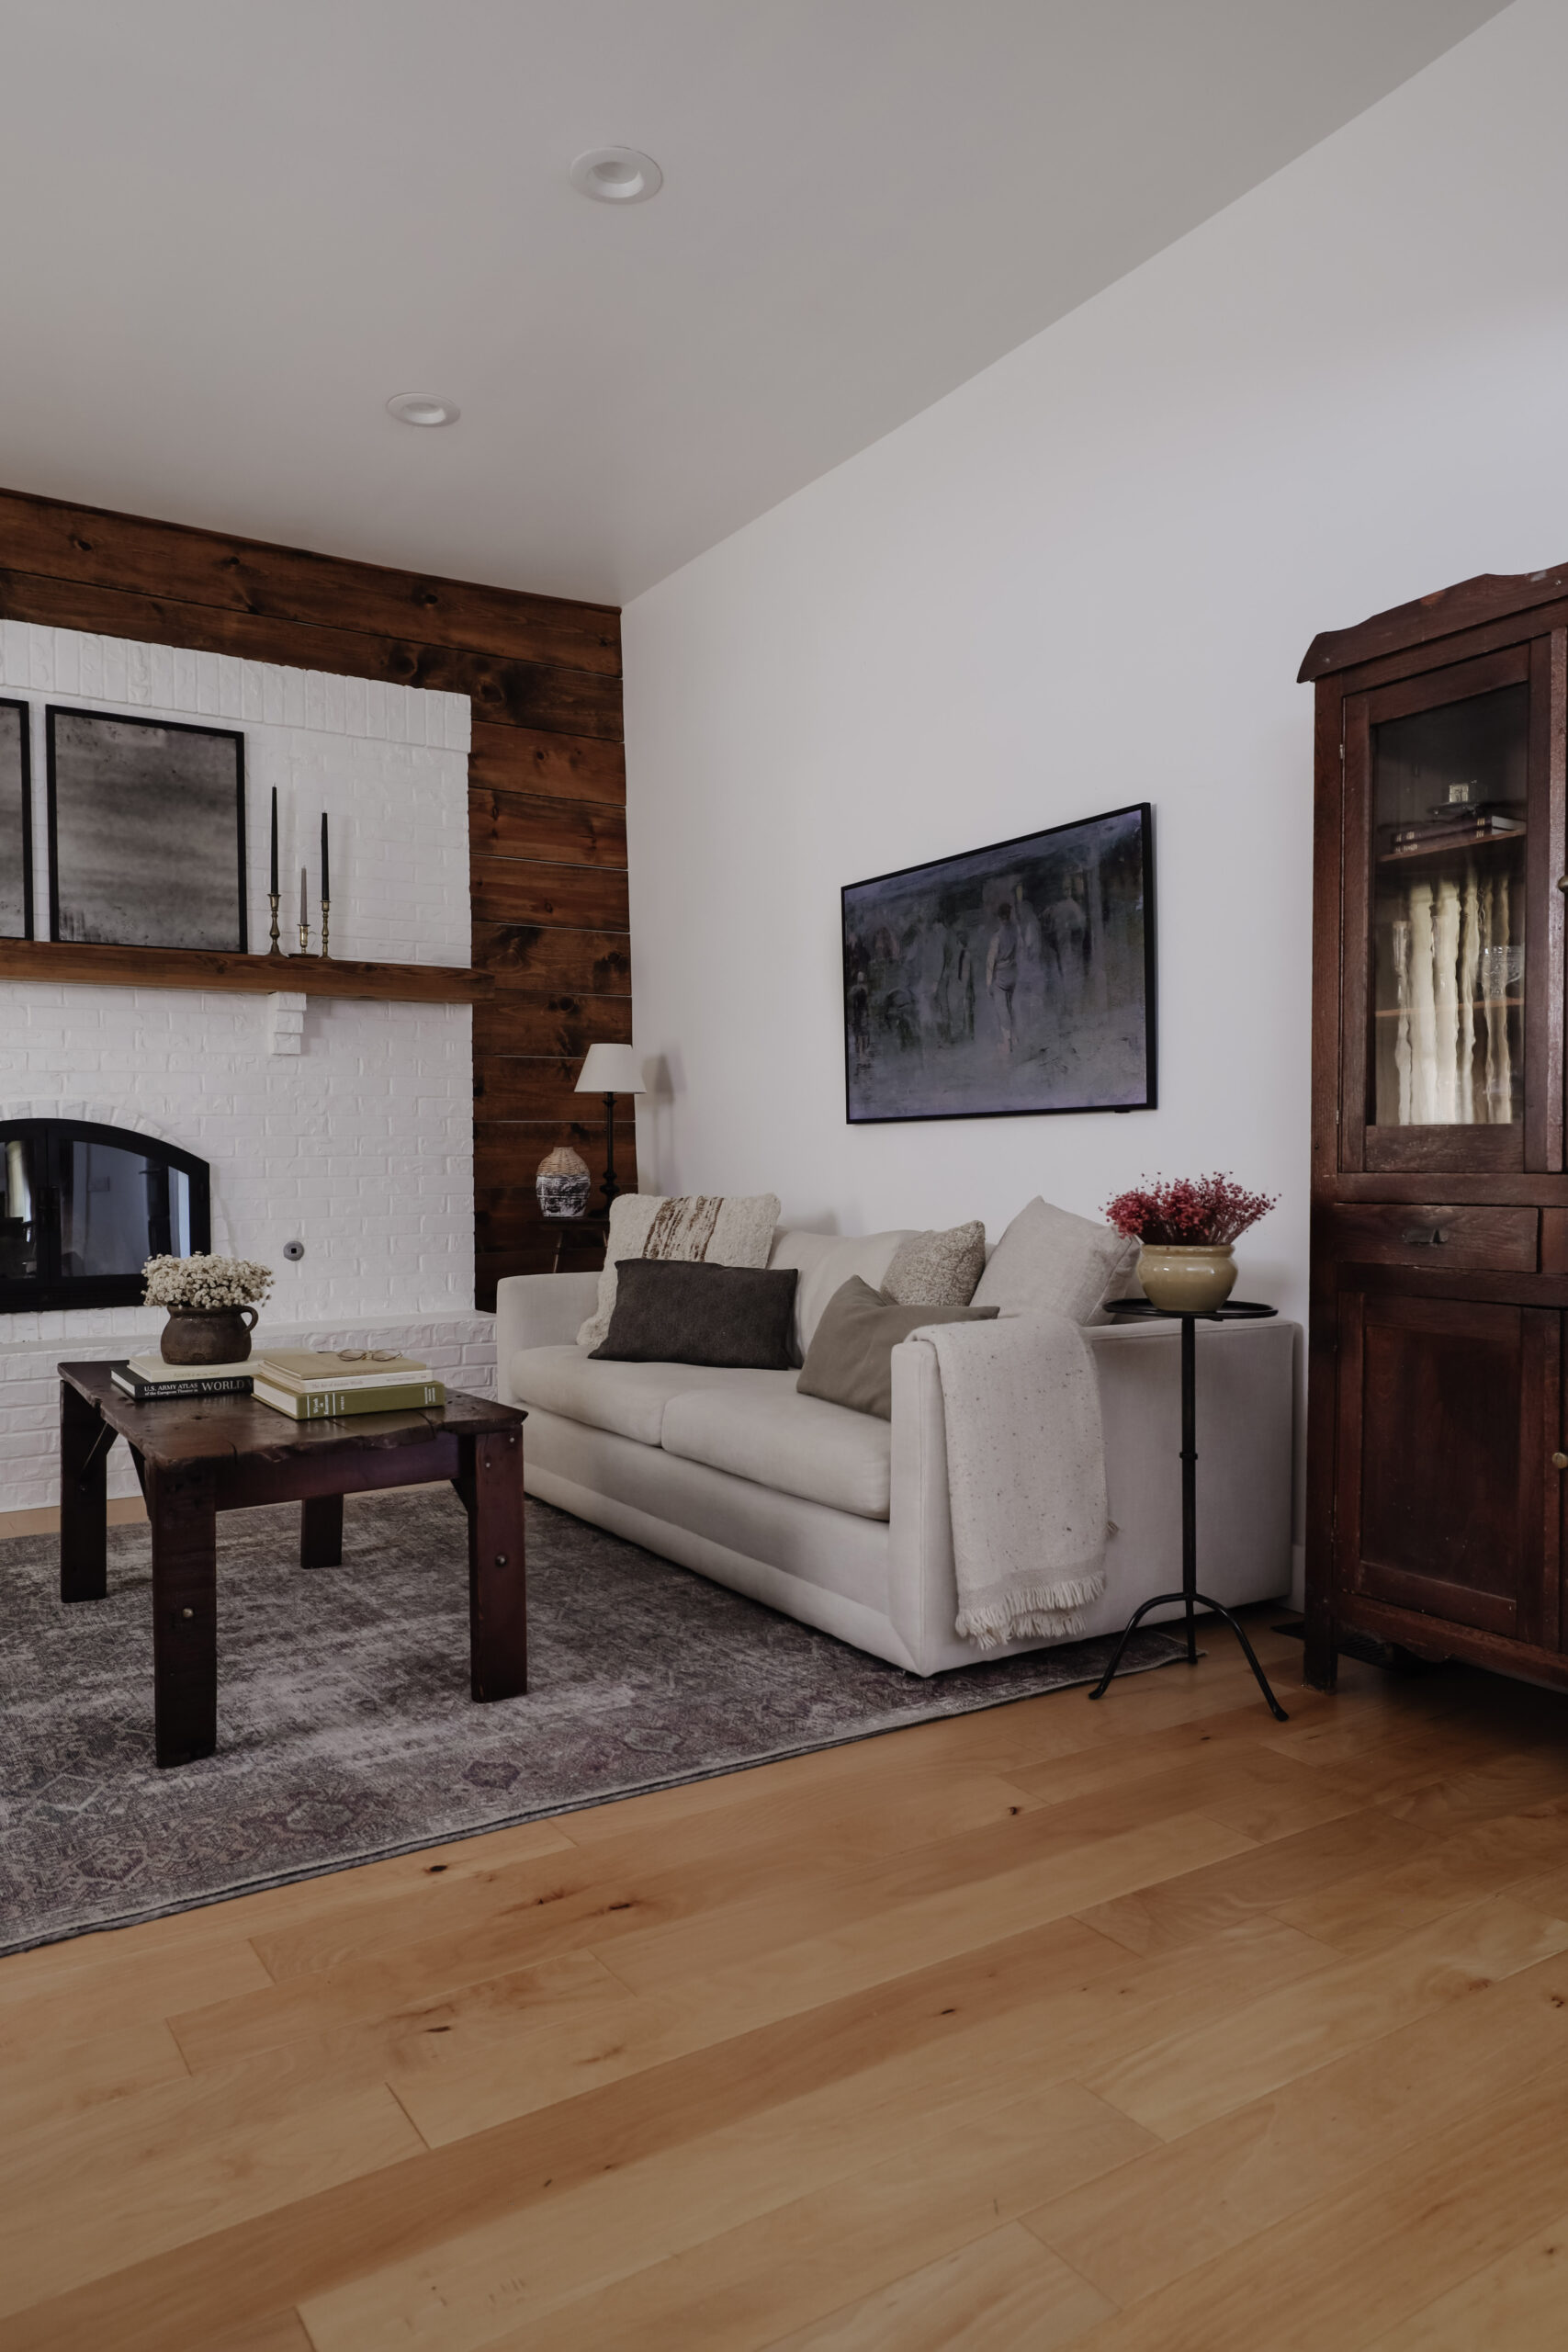 Living room with wood shiplap walls and brick fireplace. Casual sofa and antique hutch.